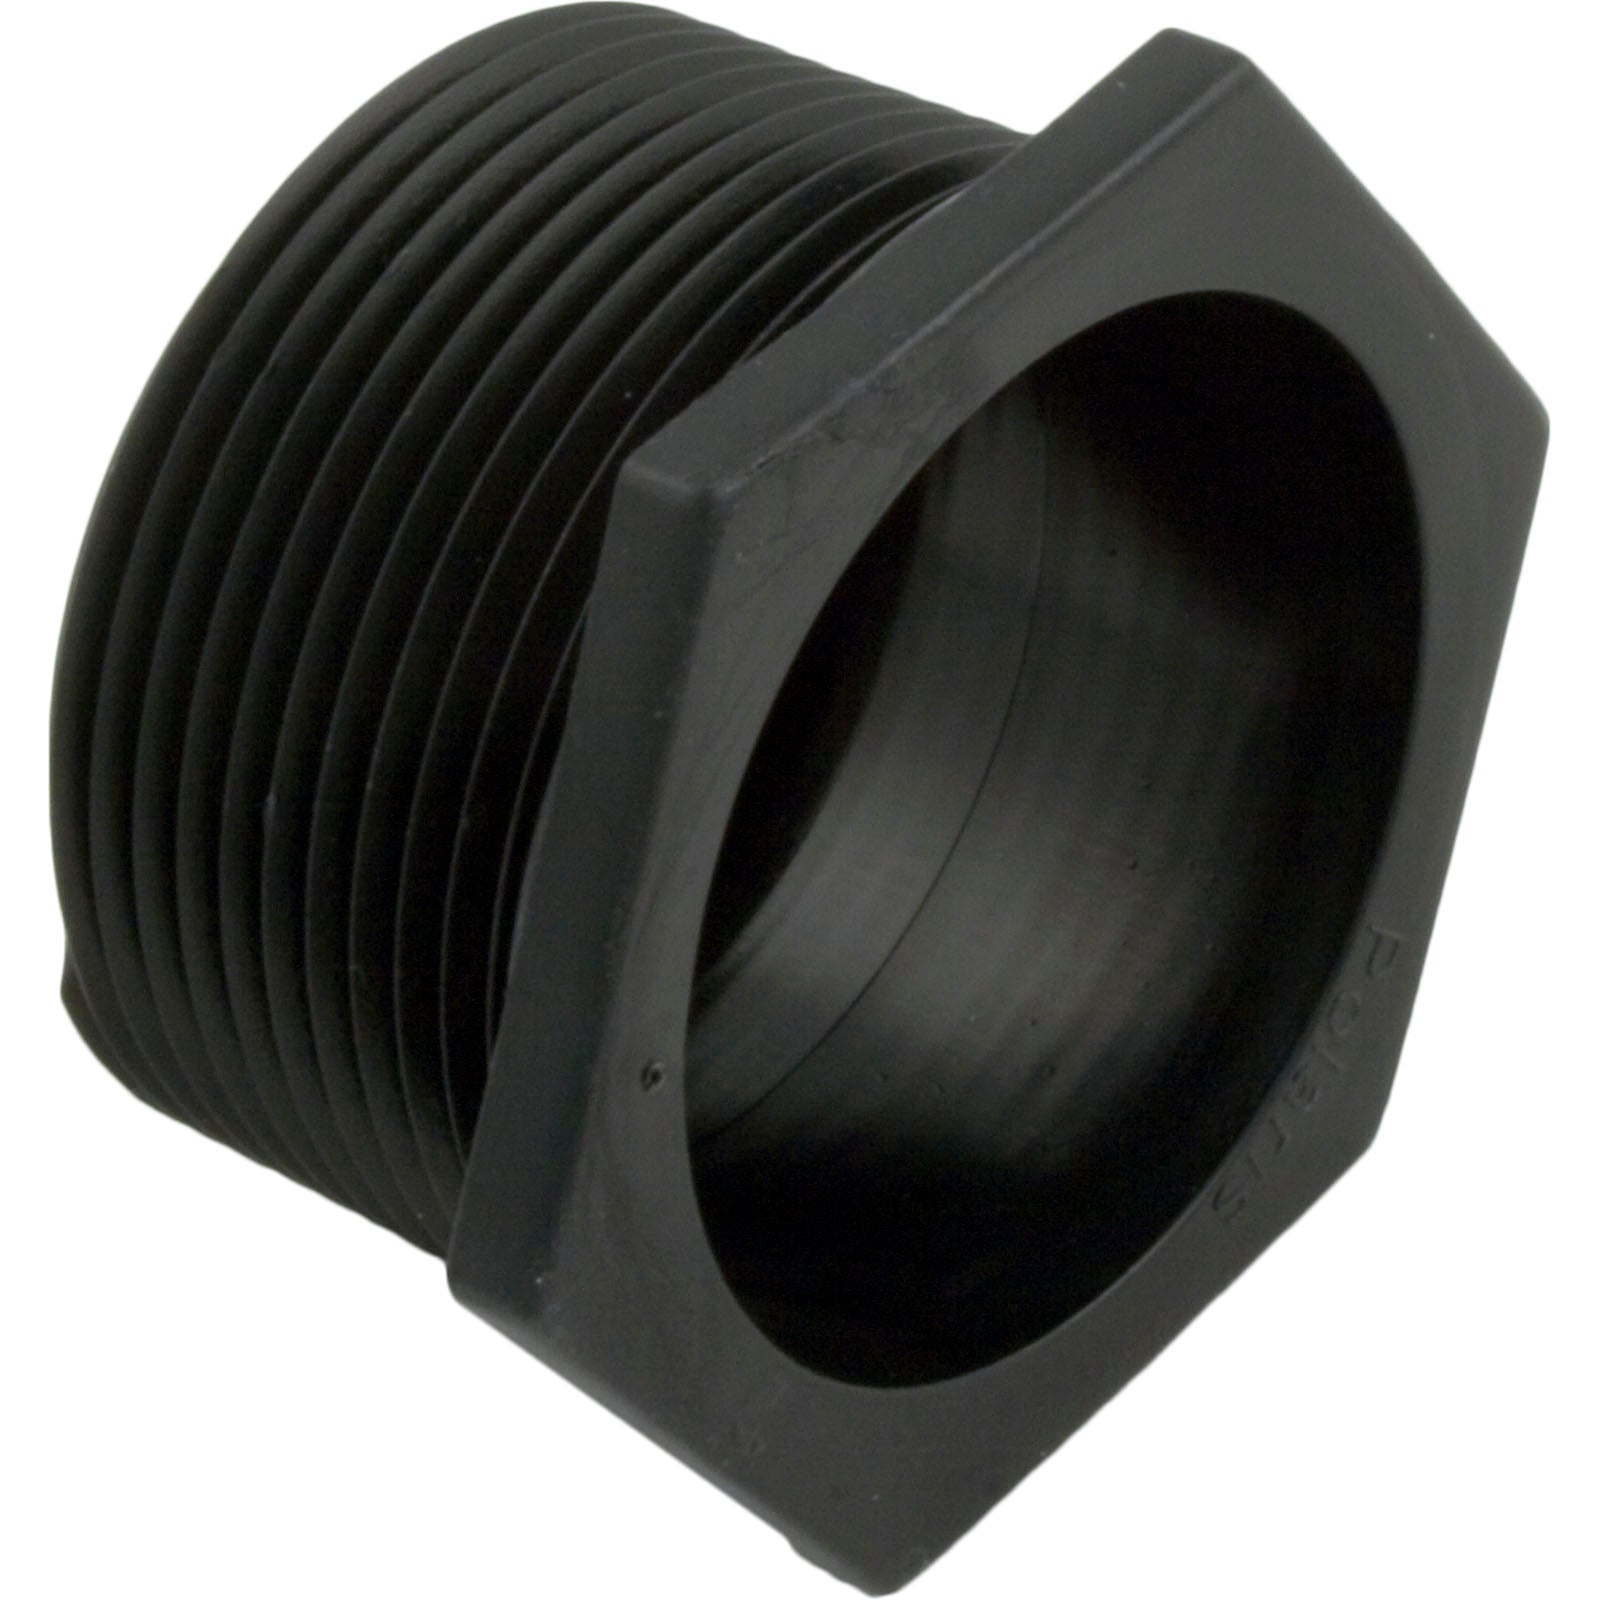 Zodiac Polaris 6-550-00 Black Universal Wall Fitting for 280/360/380 and 480 PRO Pool Cleaners